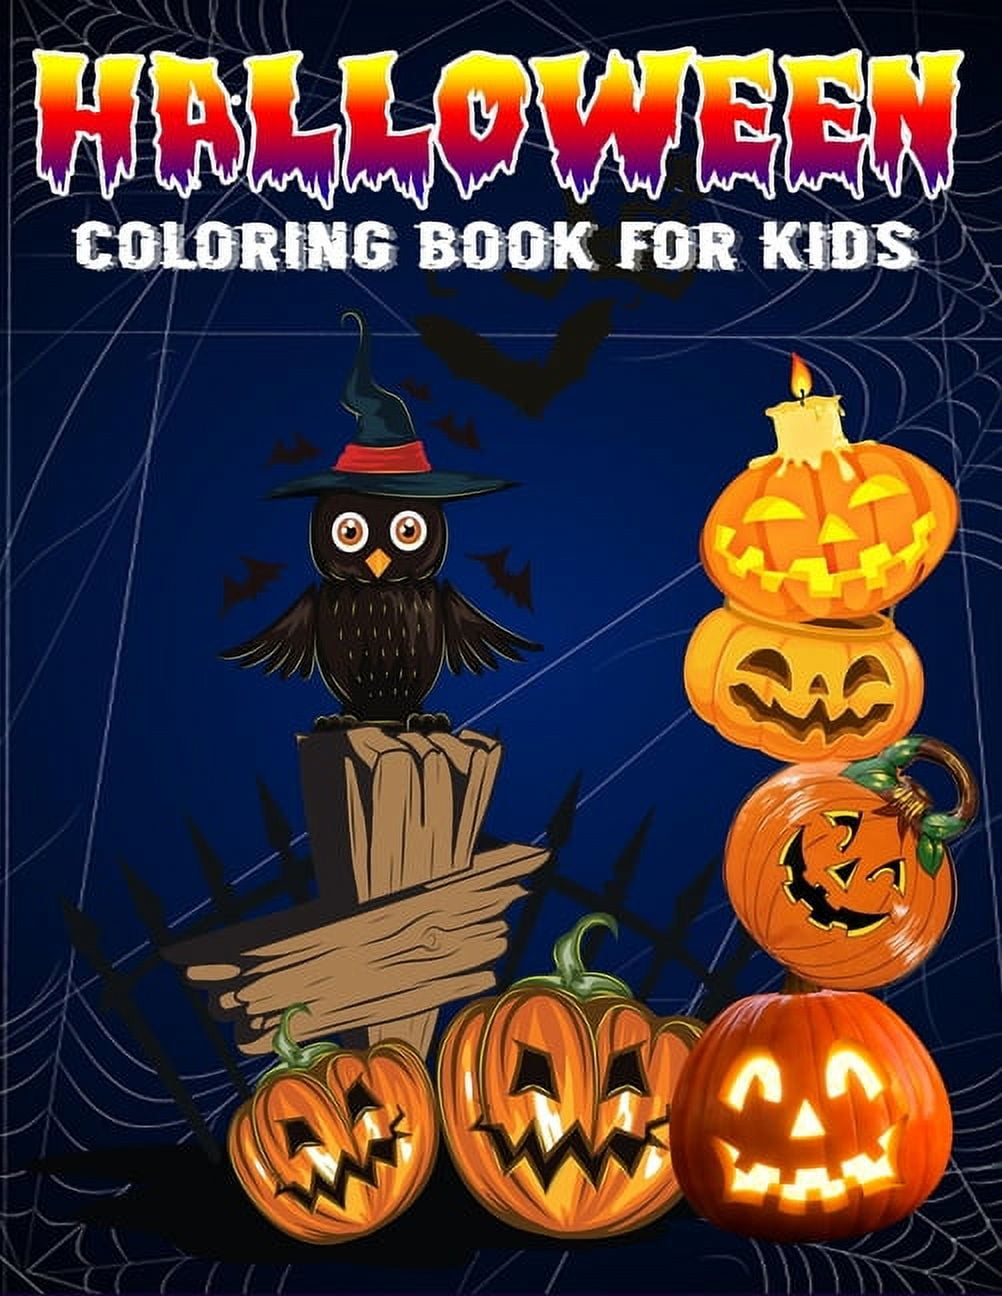 Halloween Coloring Books for Kids, Pack of 20, 5” x 7” Mini